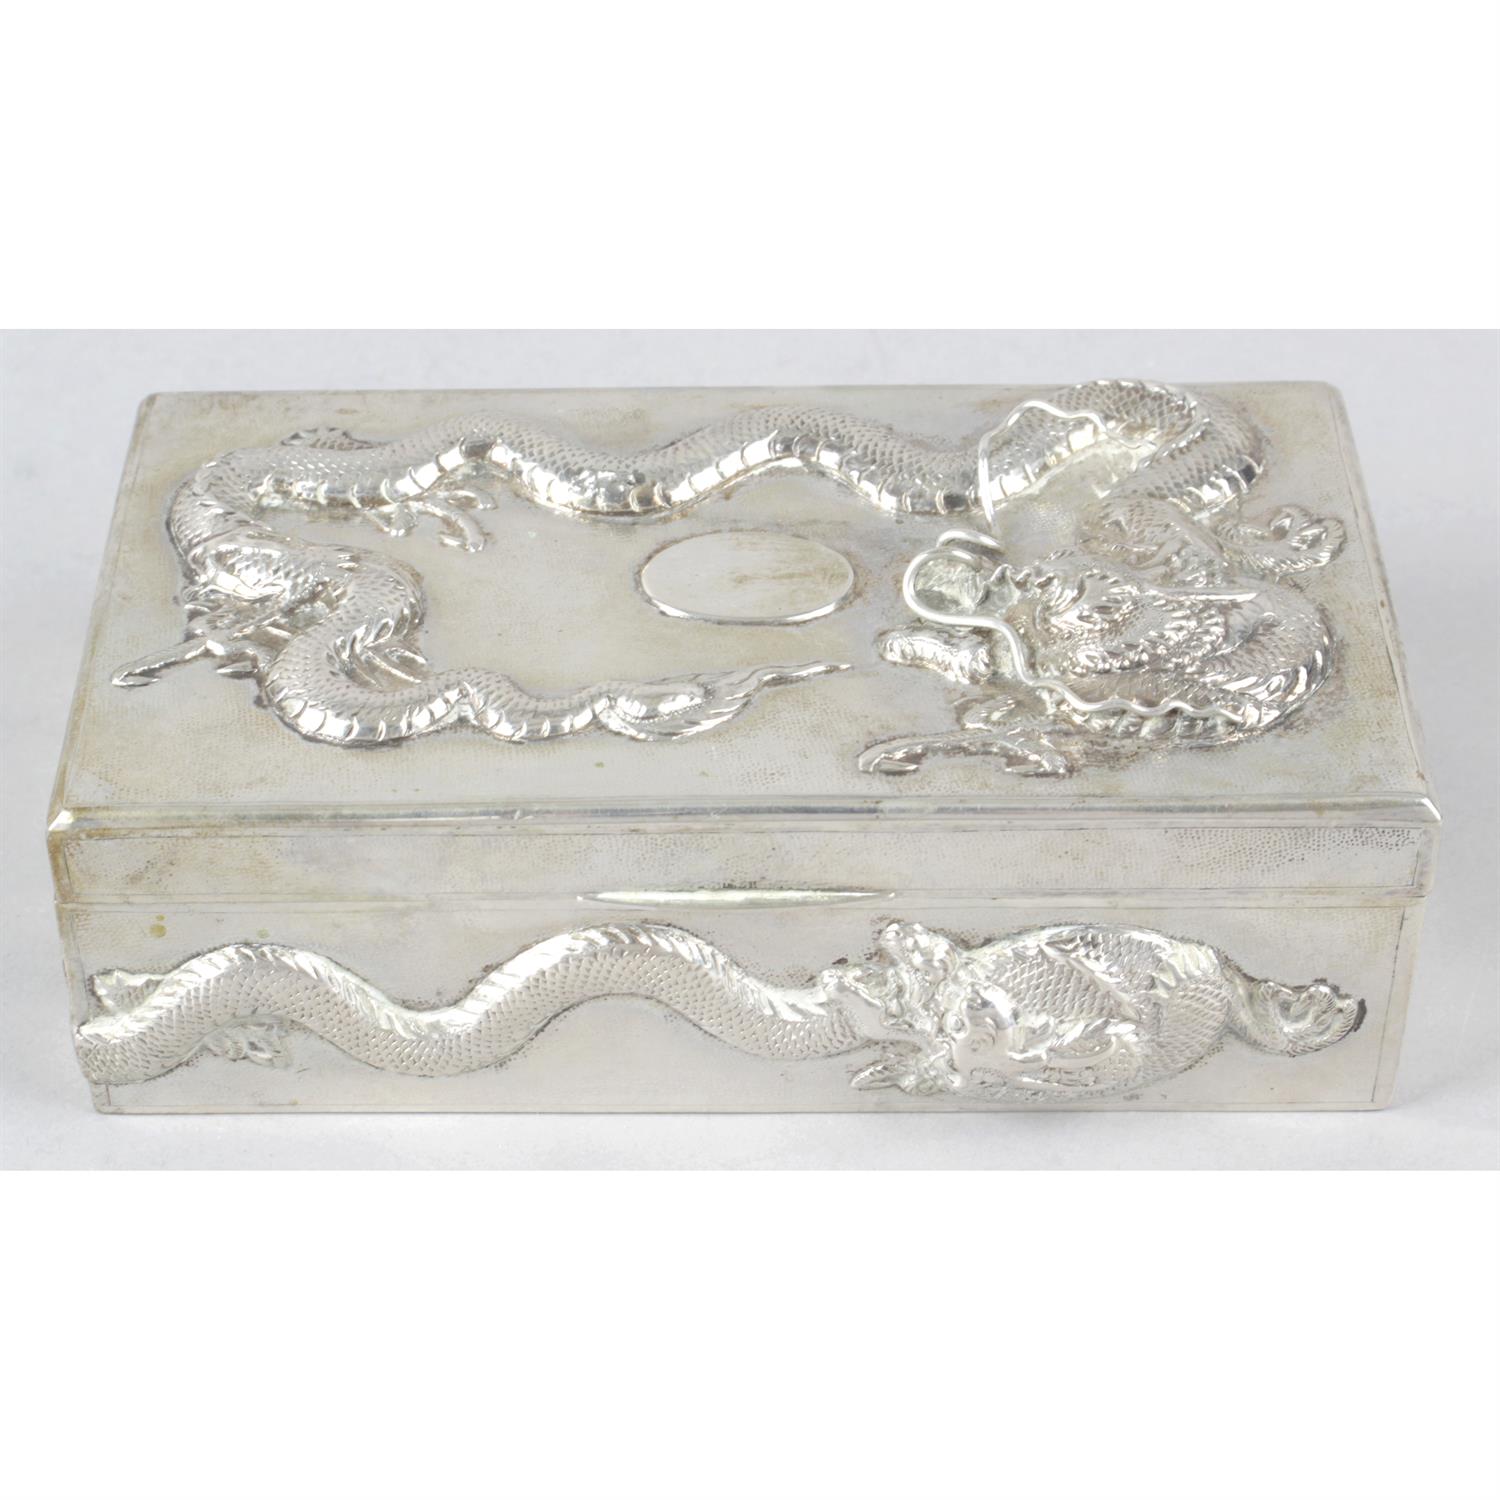 A Chinese export silver table cigarette box decorated with dragons in relief.